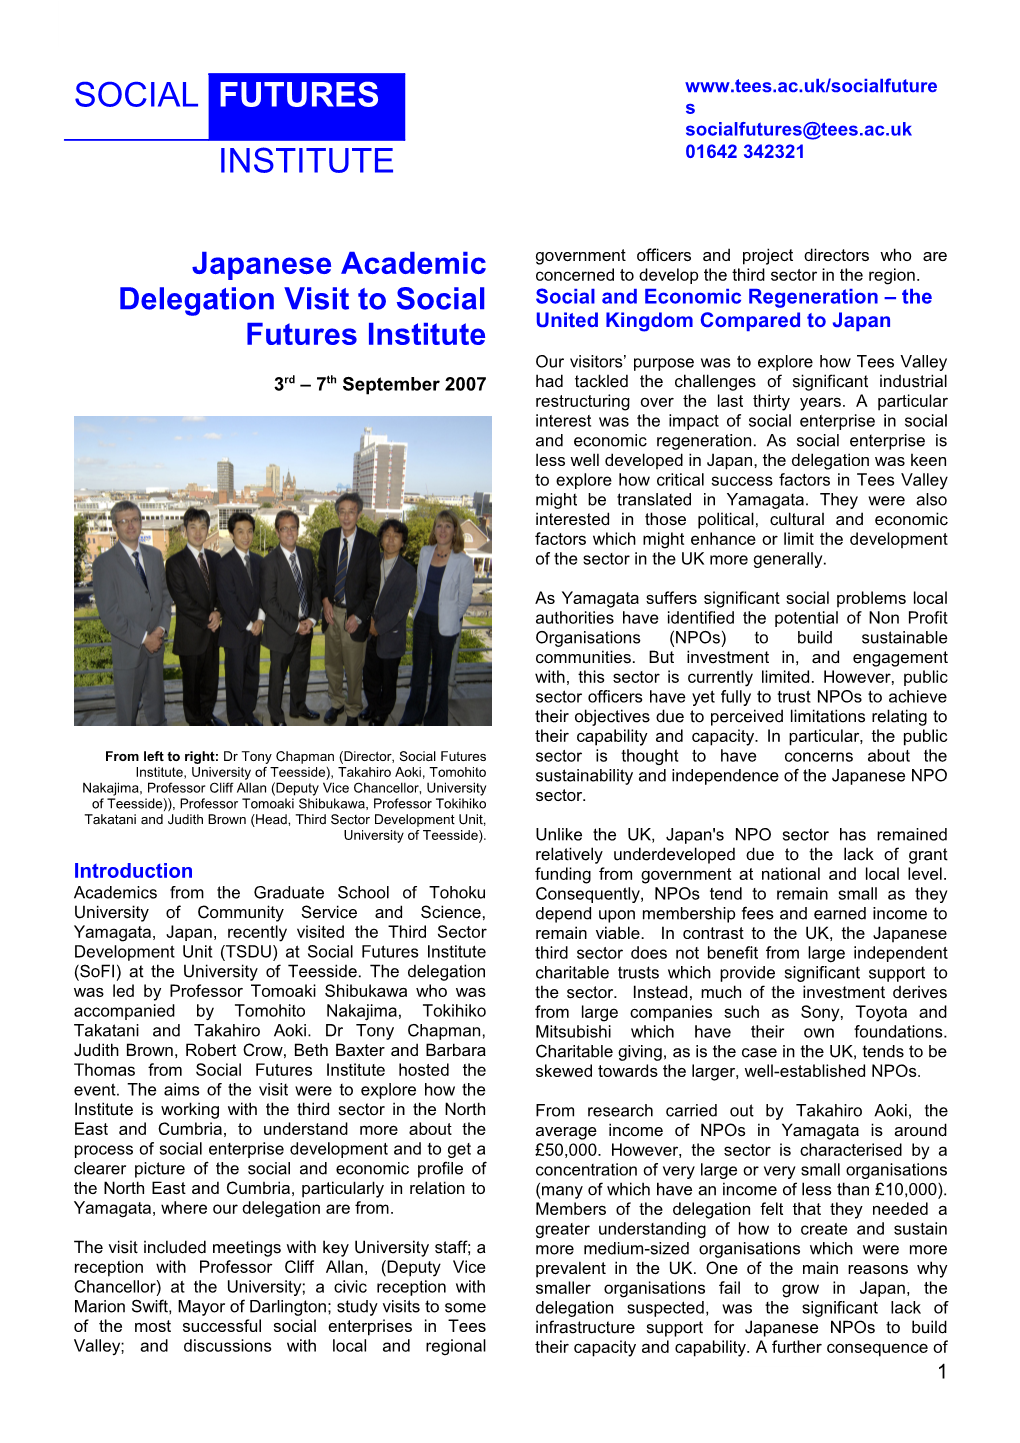 Academics from Japan Visit Toteesside